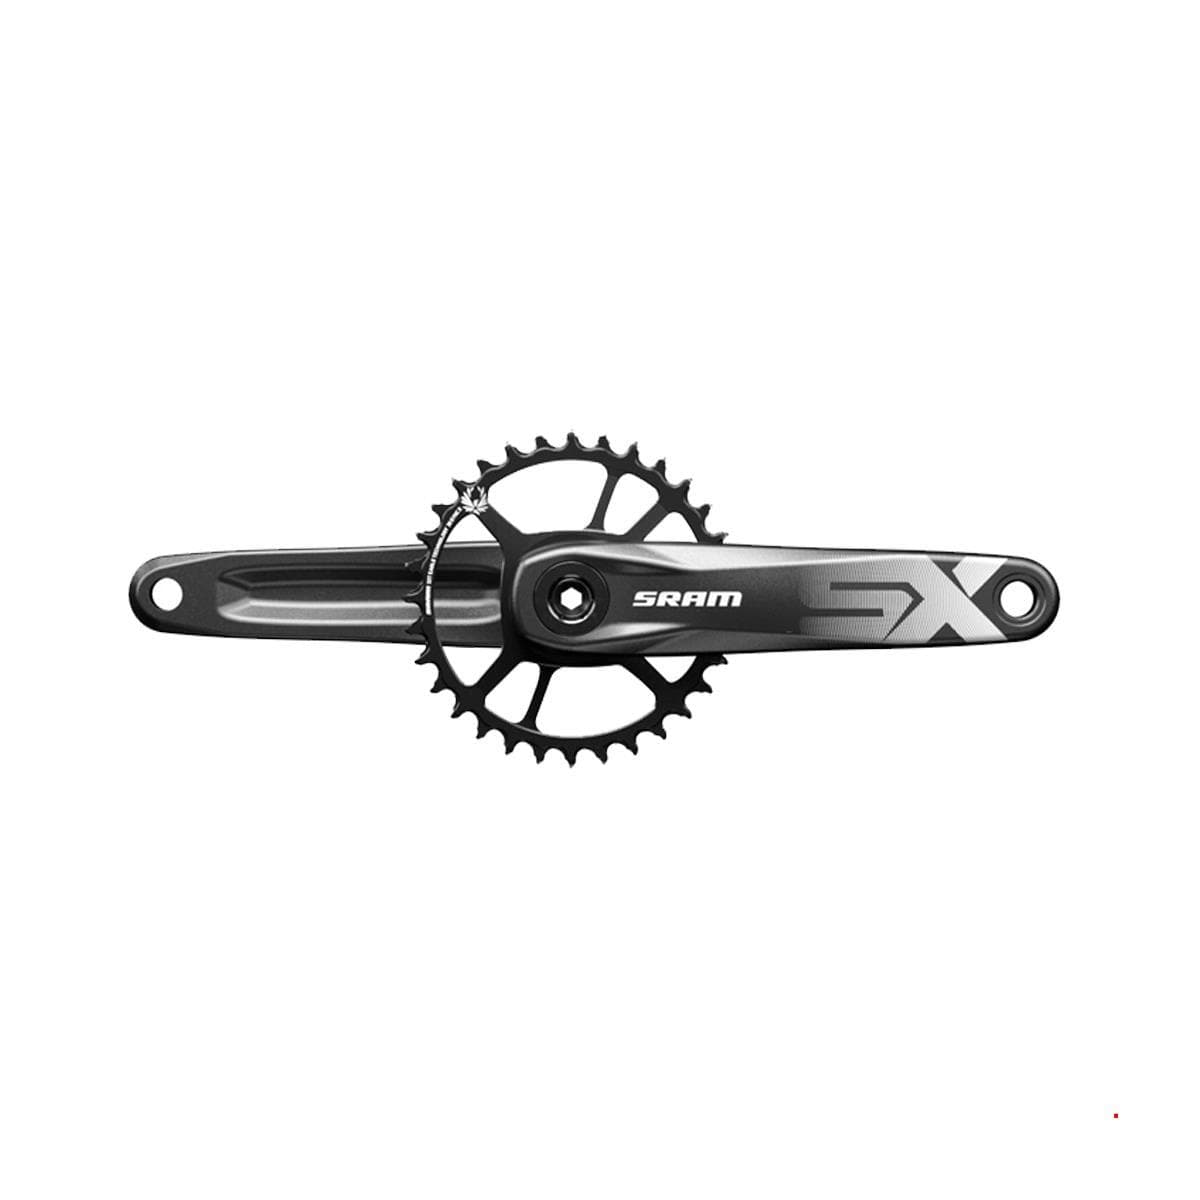 Sram Crankset Sx Eagle Dub 12S With Direct Mount 32T X-Sync 2 Steel Chainring A1: Black 175Mm